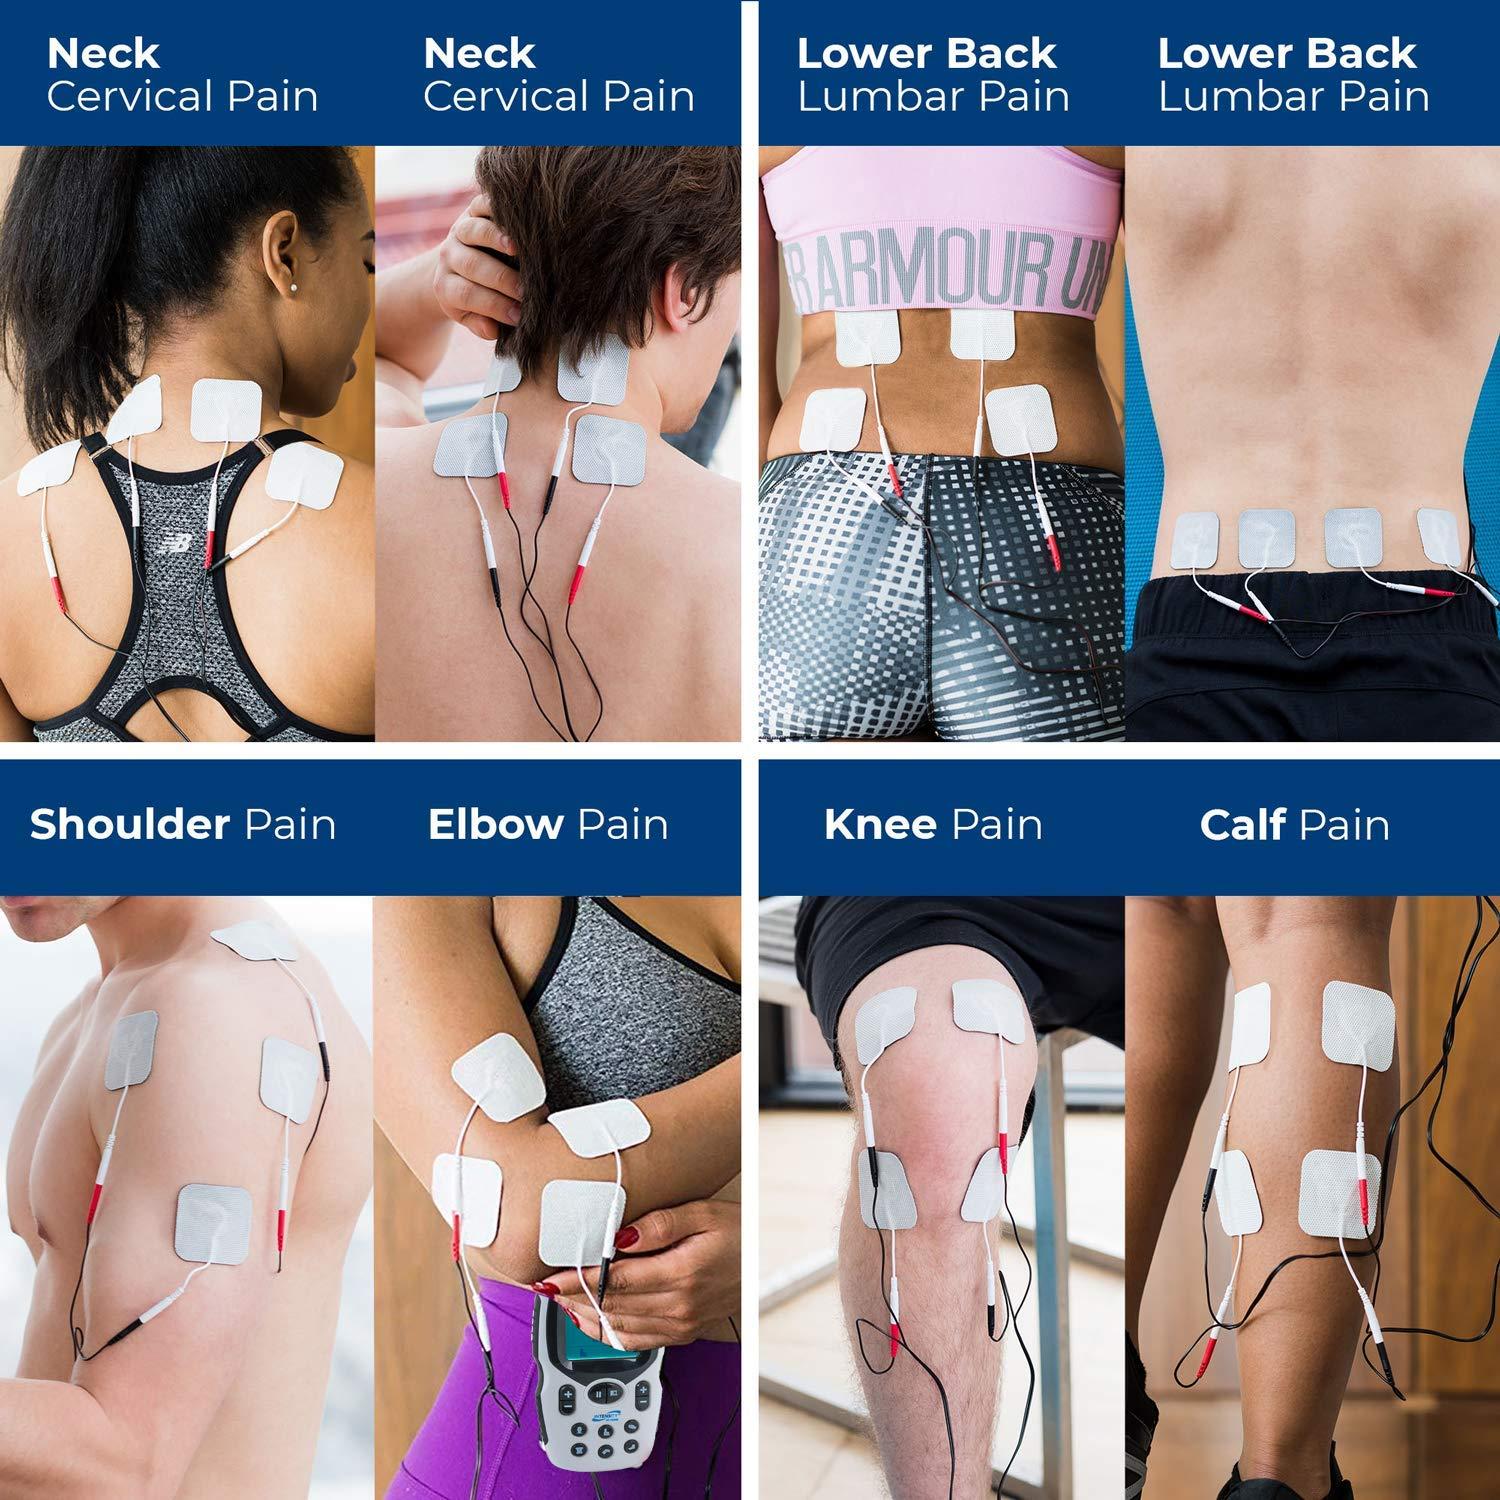 Transcutaneous Electrical Stimulation (TENS) for Cervical Spine Pain 